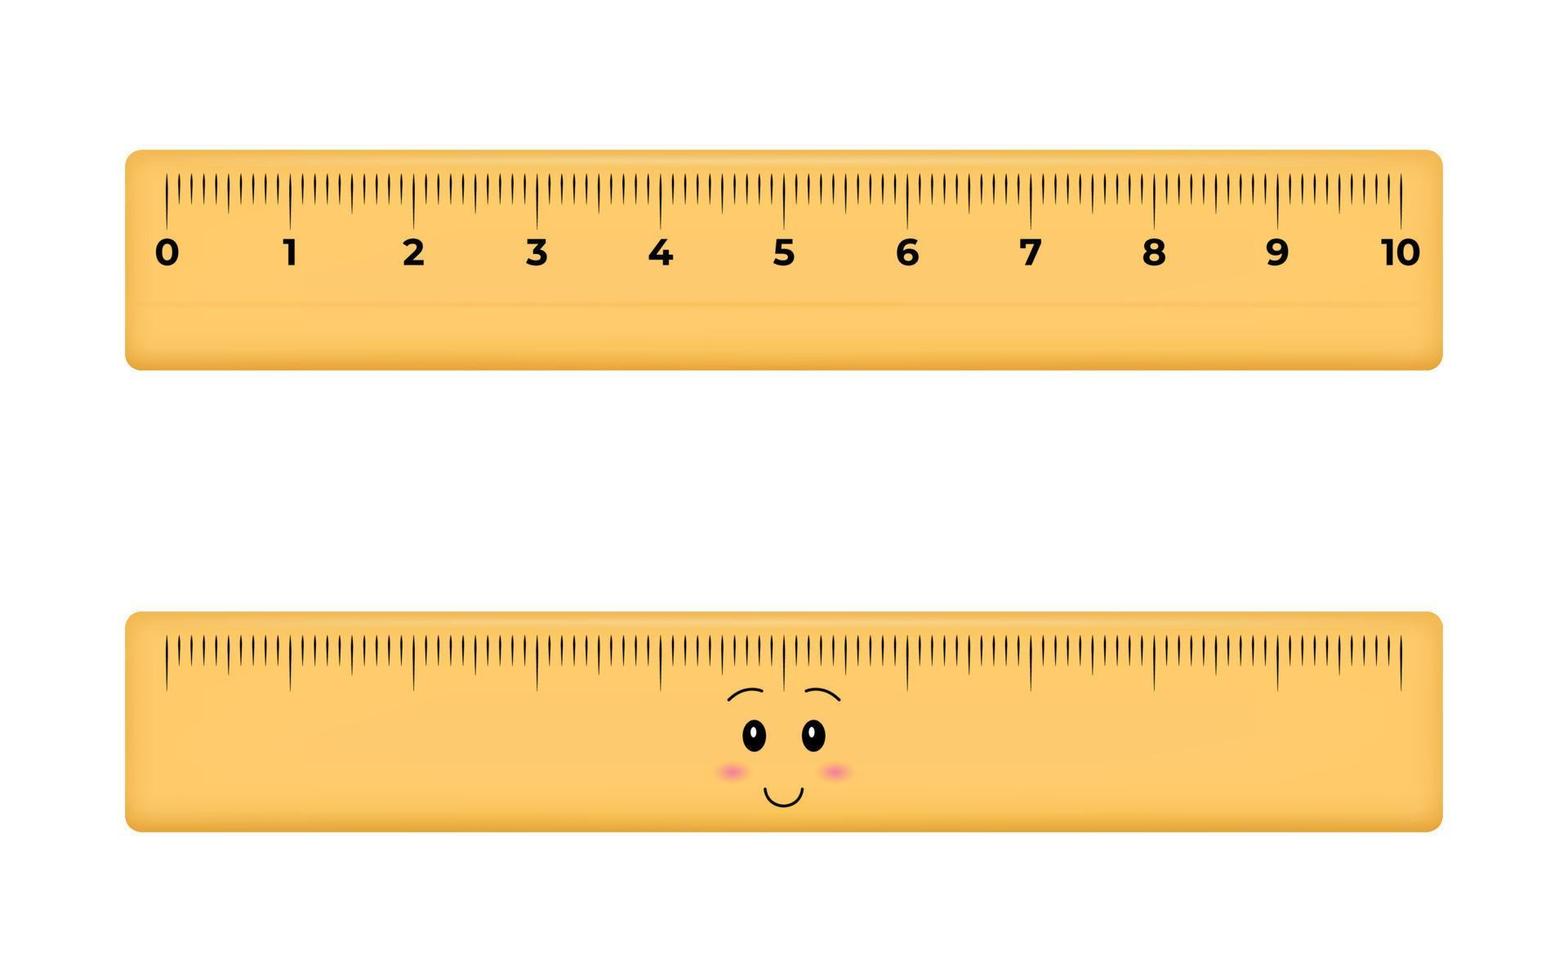 Cute wooden or plastic ruler measure instrument kawaii isolated. School measuring ruler in centimeters scale. Vector 3d illustration